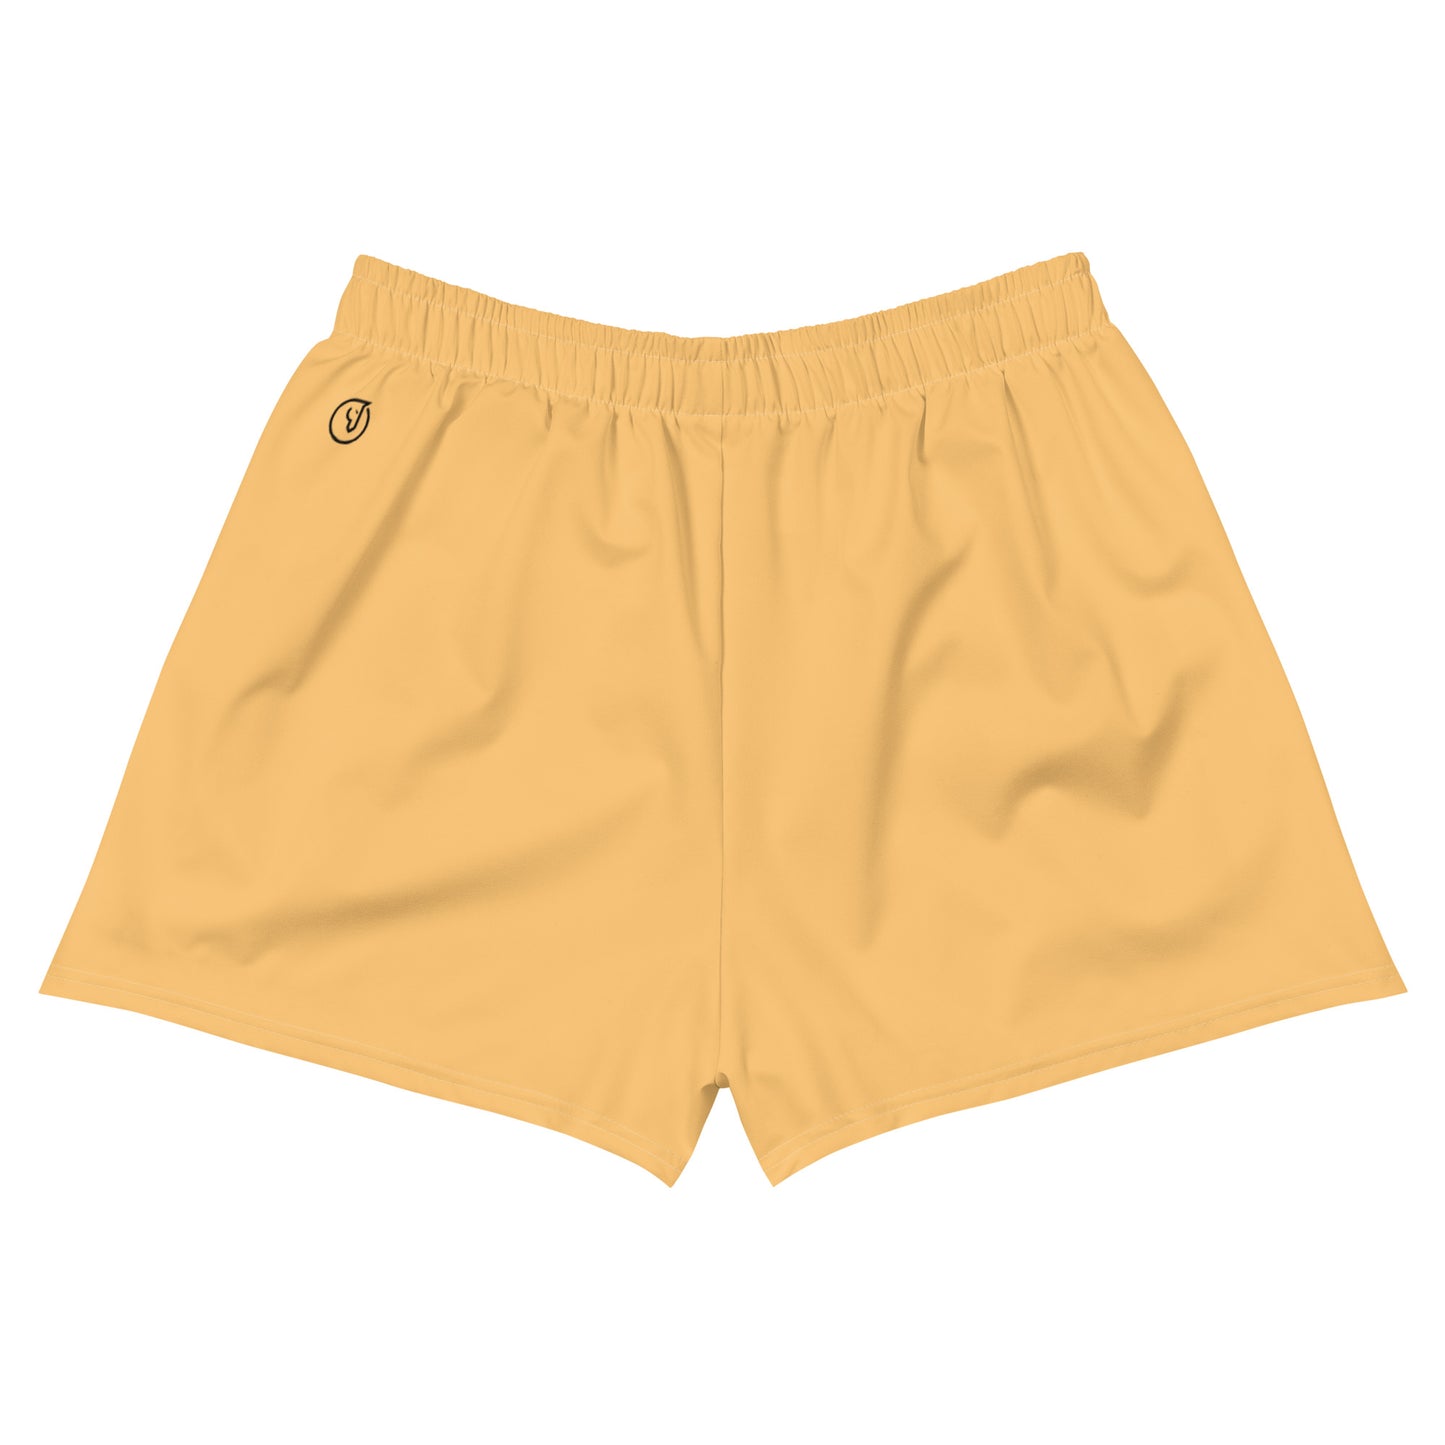 Humble Sportswear, Womens color match shorts, women’s athletic shorts, women’s eco-friendly shorts